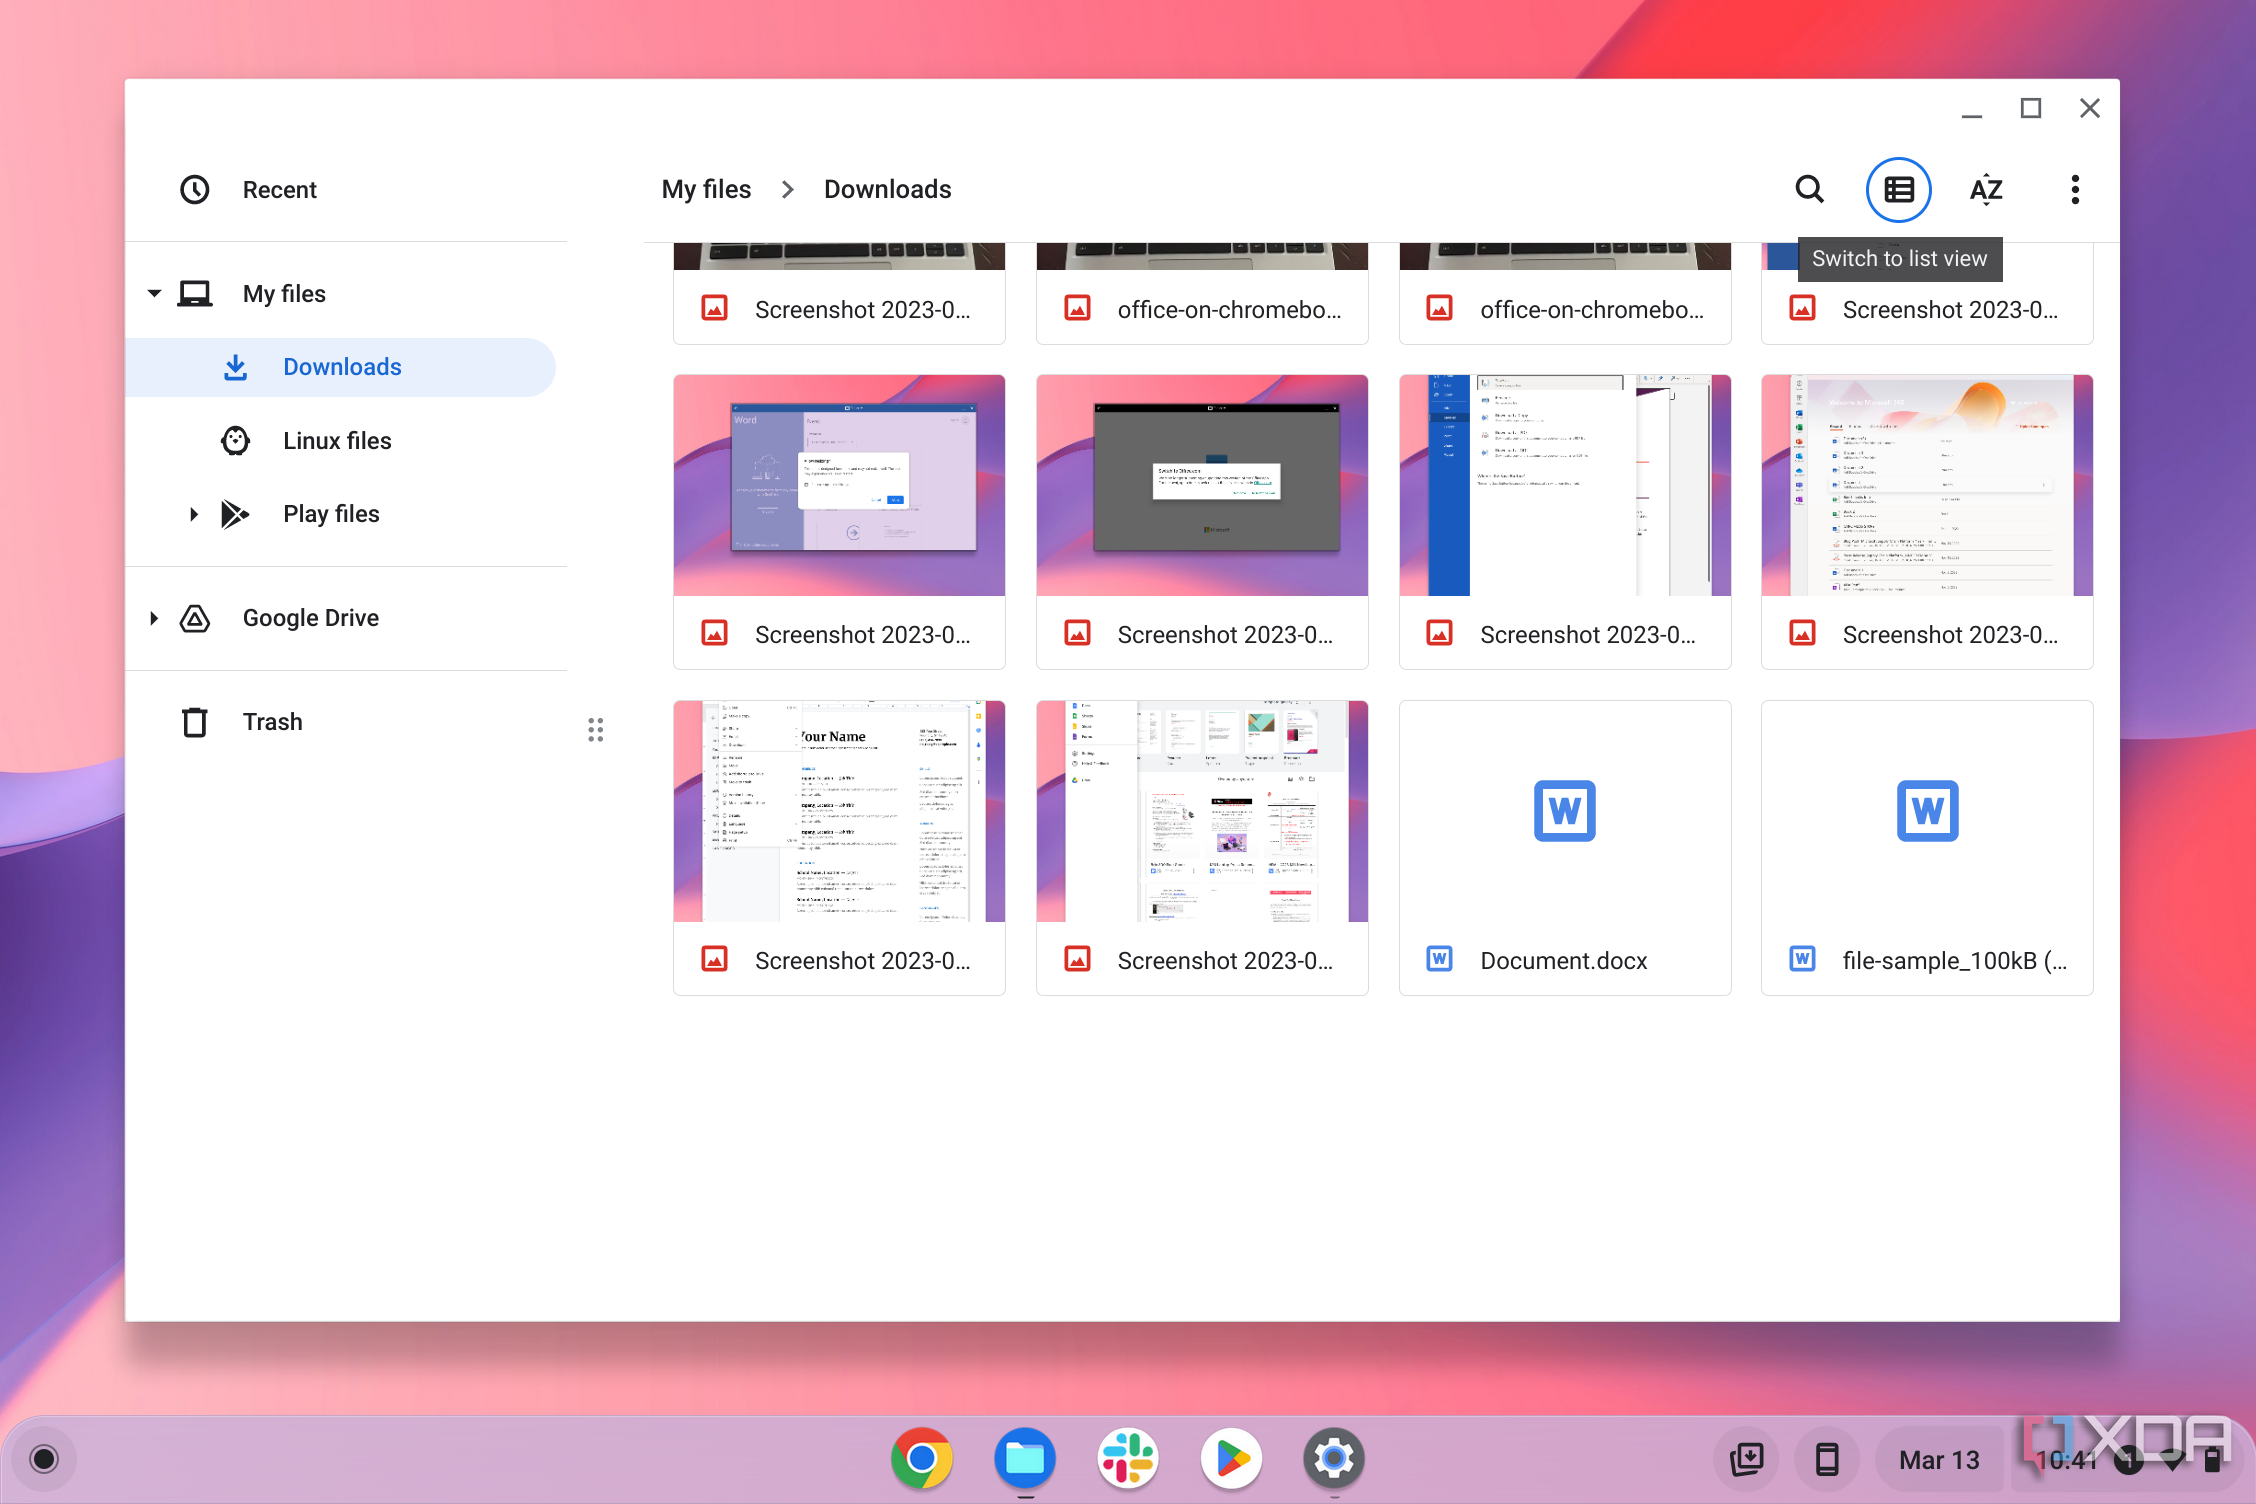 The ChromeOS Files app is open